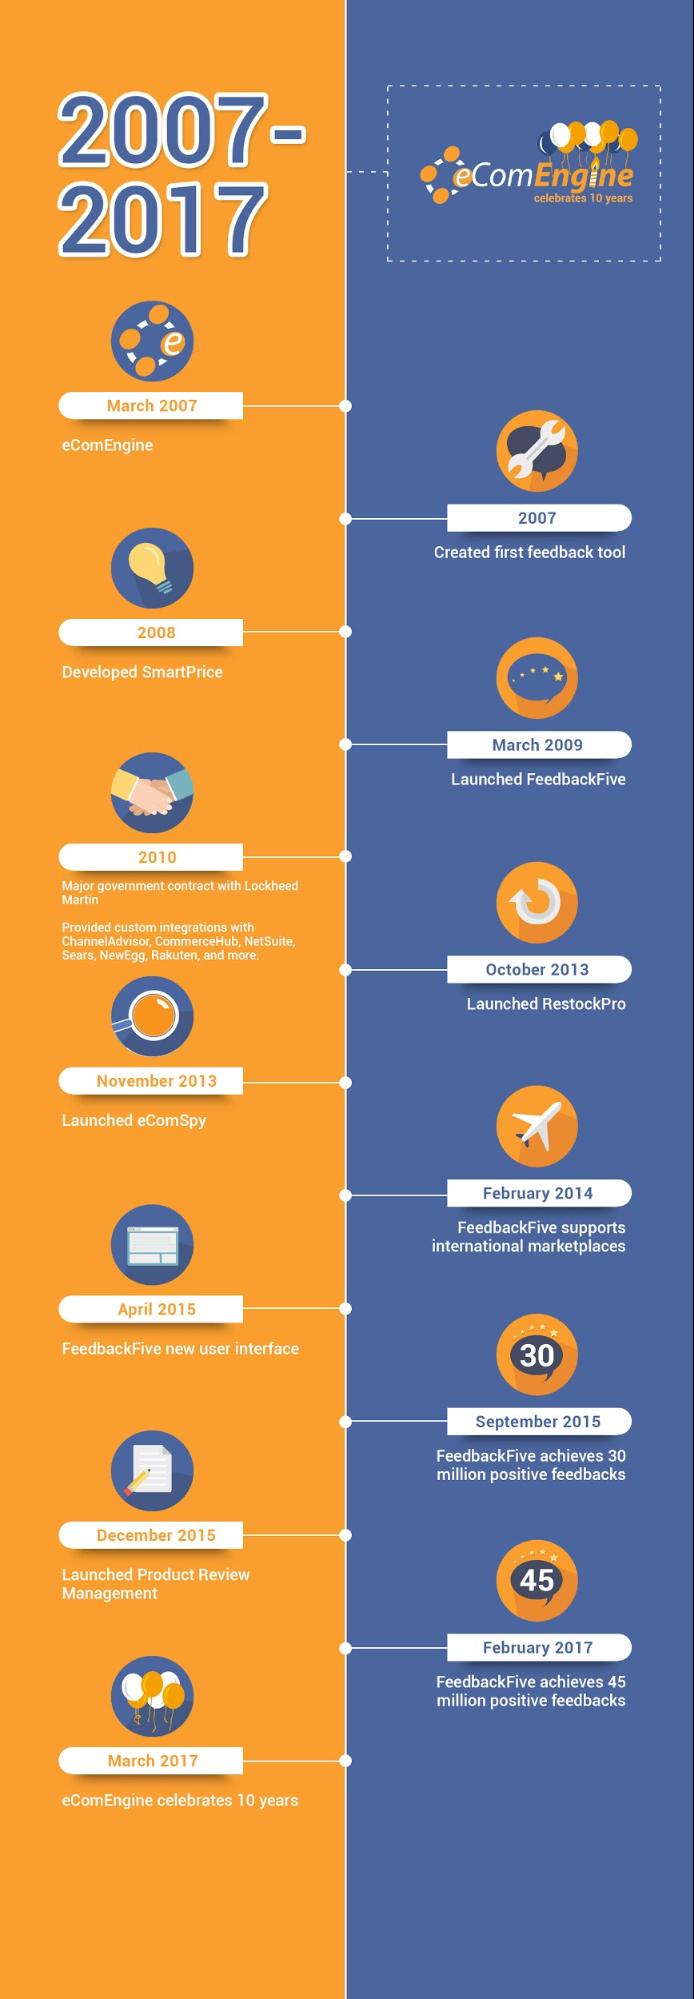 Infographic that shows the major milestones for eComEngine between 2007 and 2017